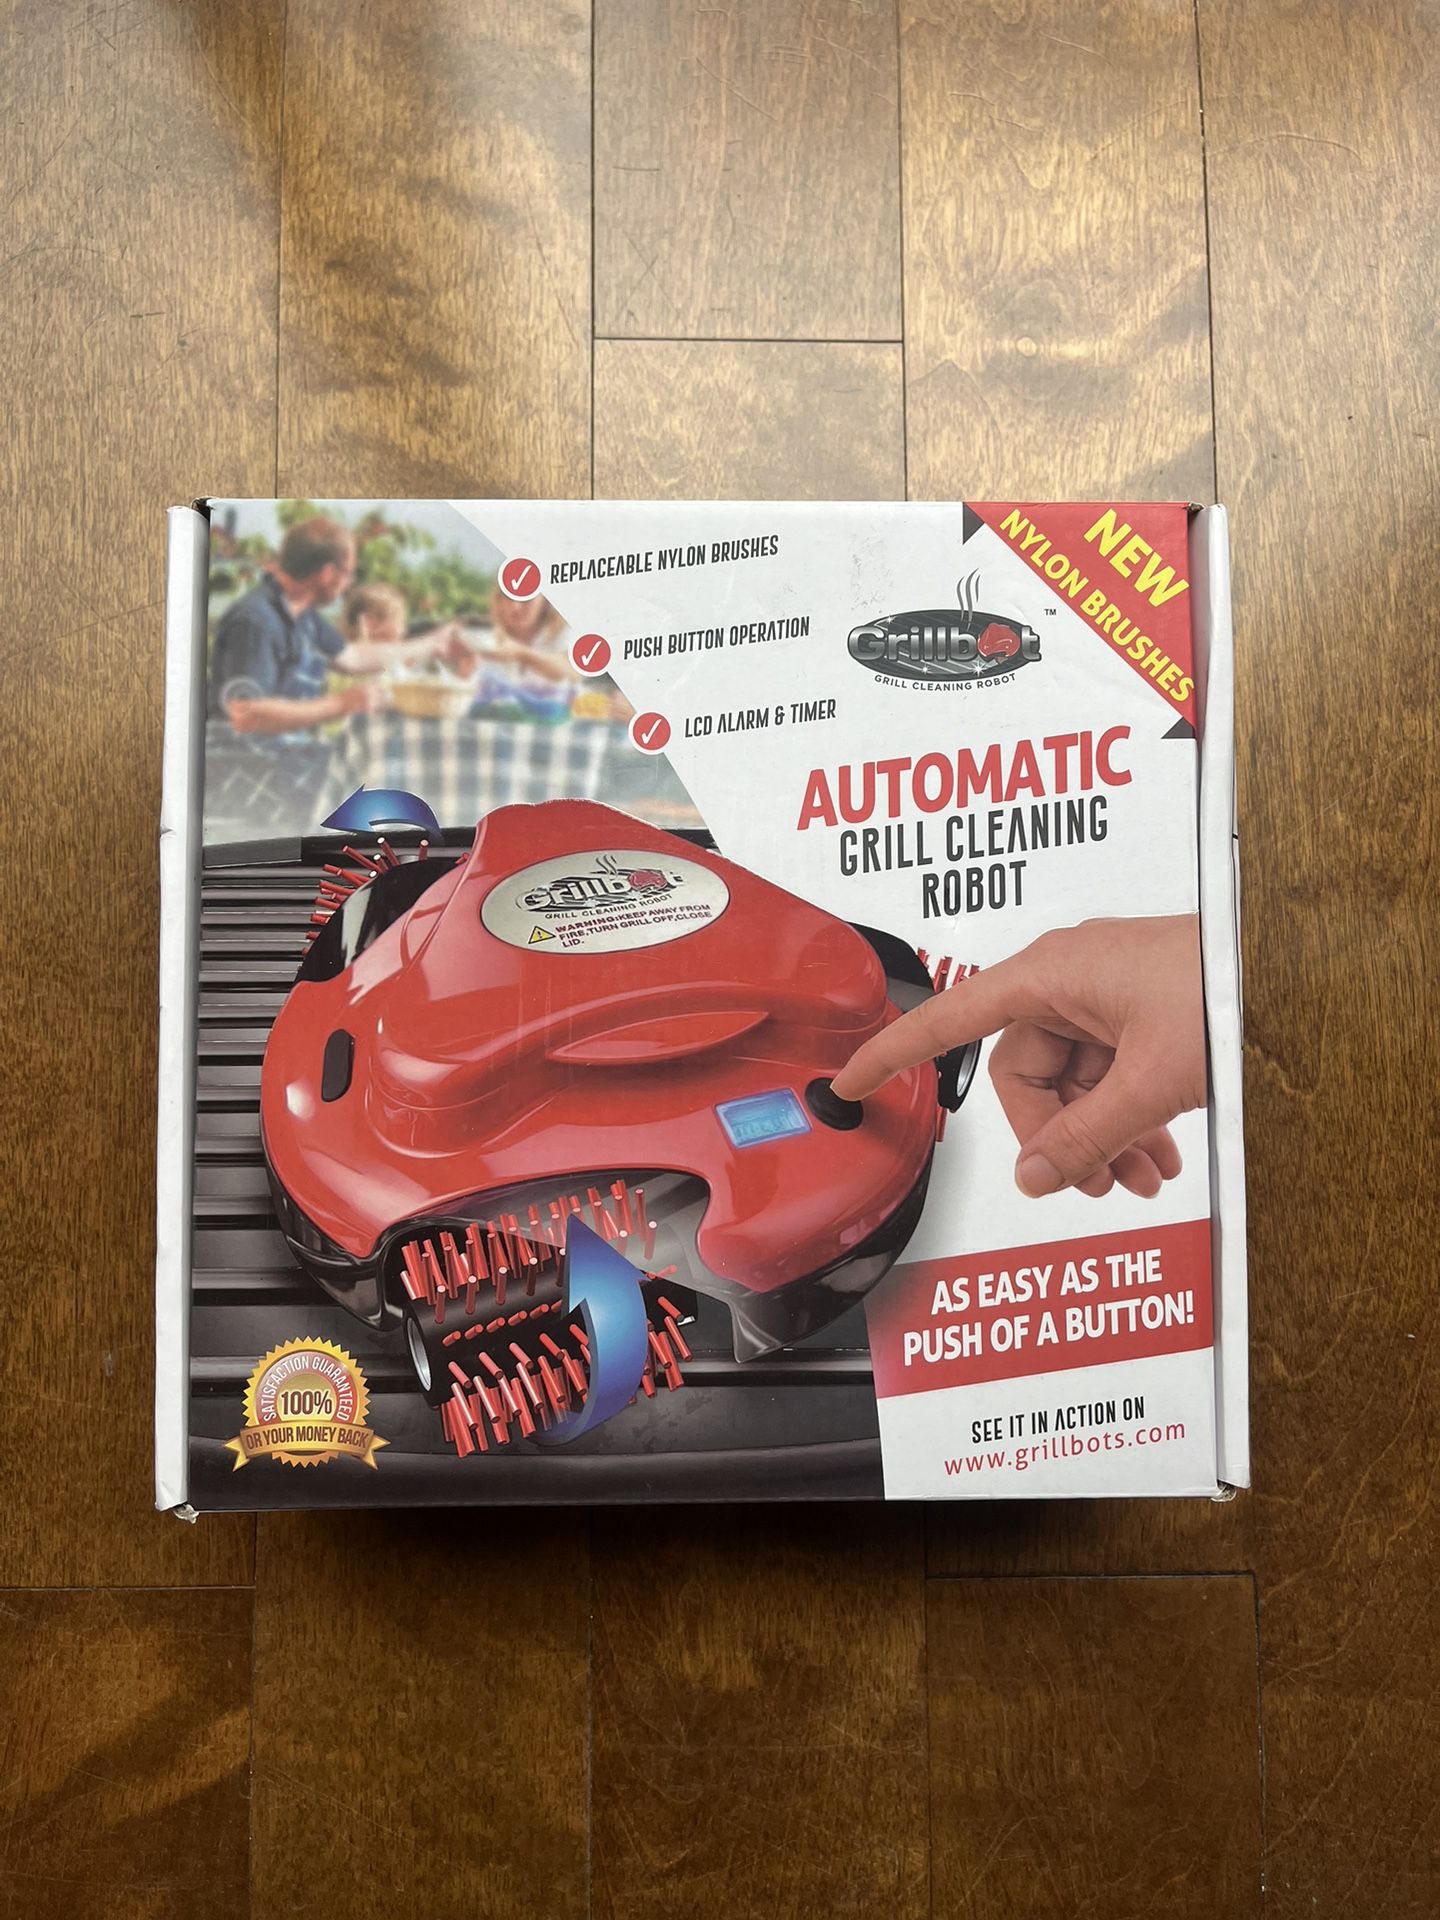 Grill Bot- Automatic Grill Cleaning Robot